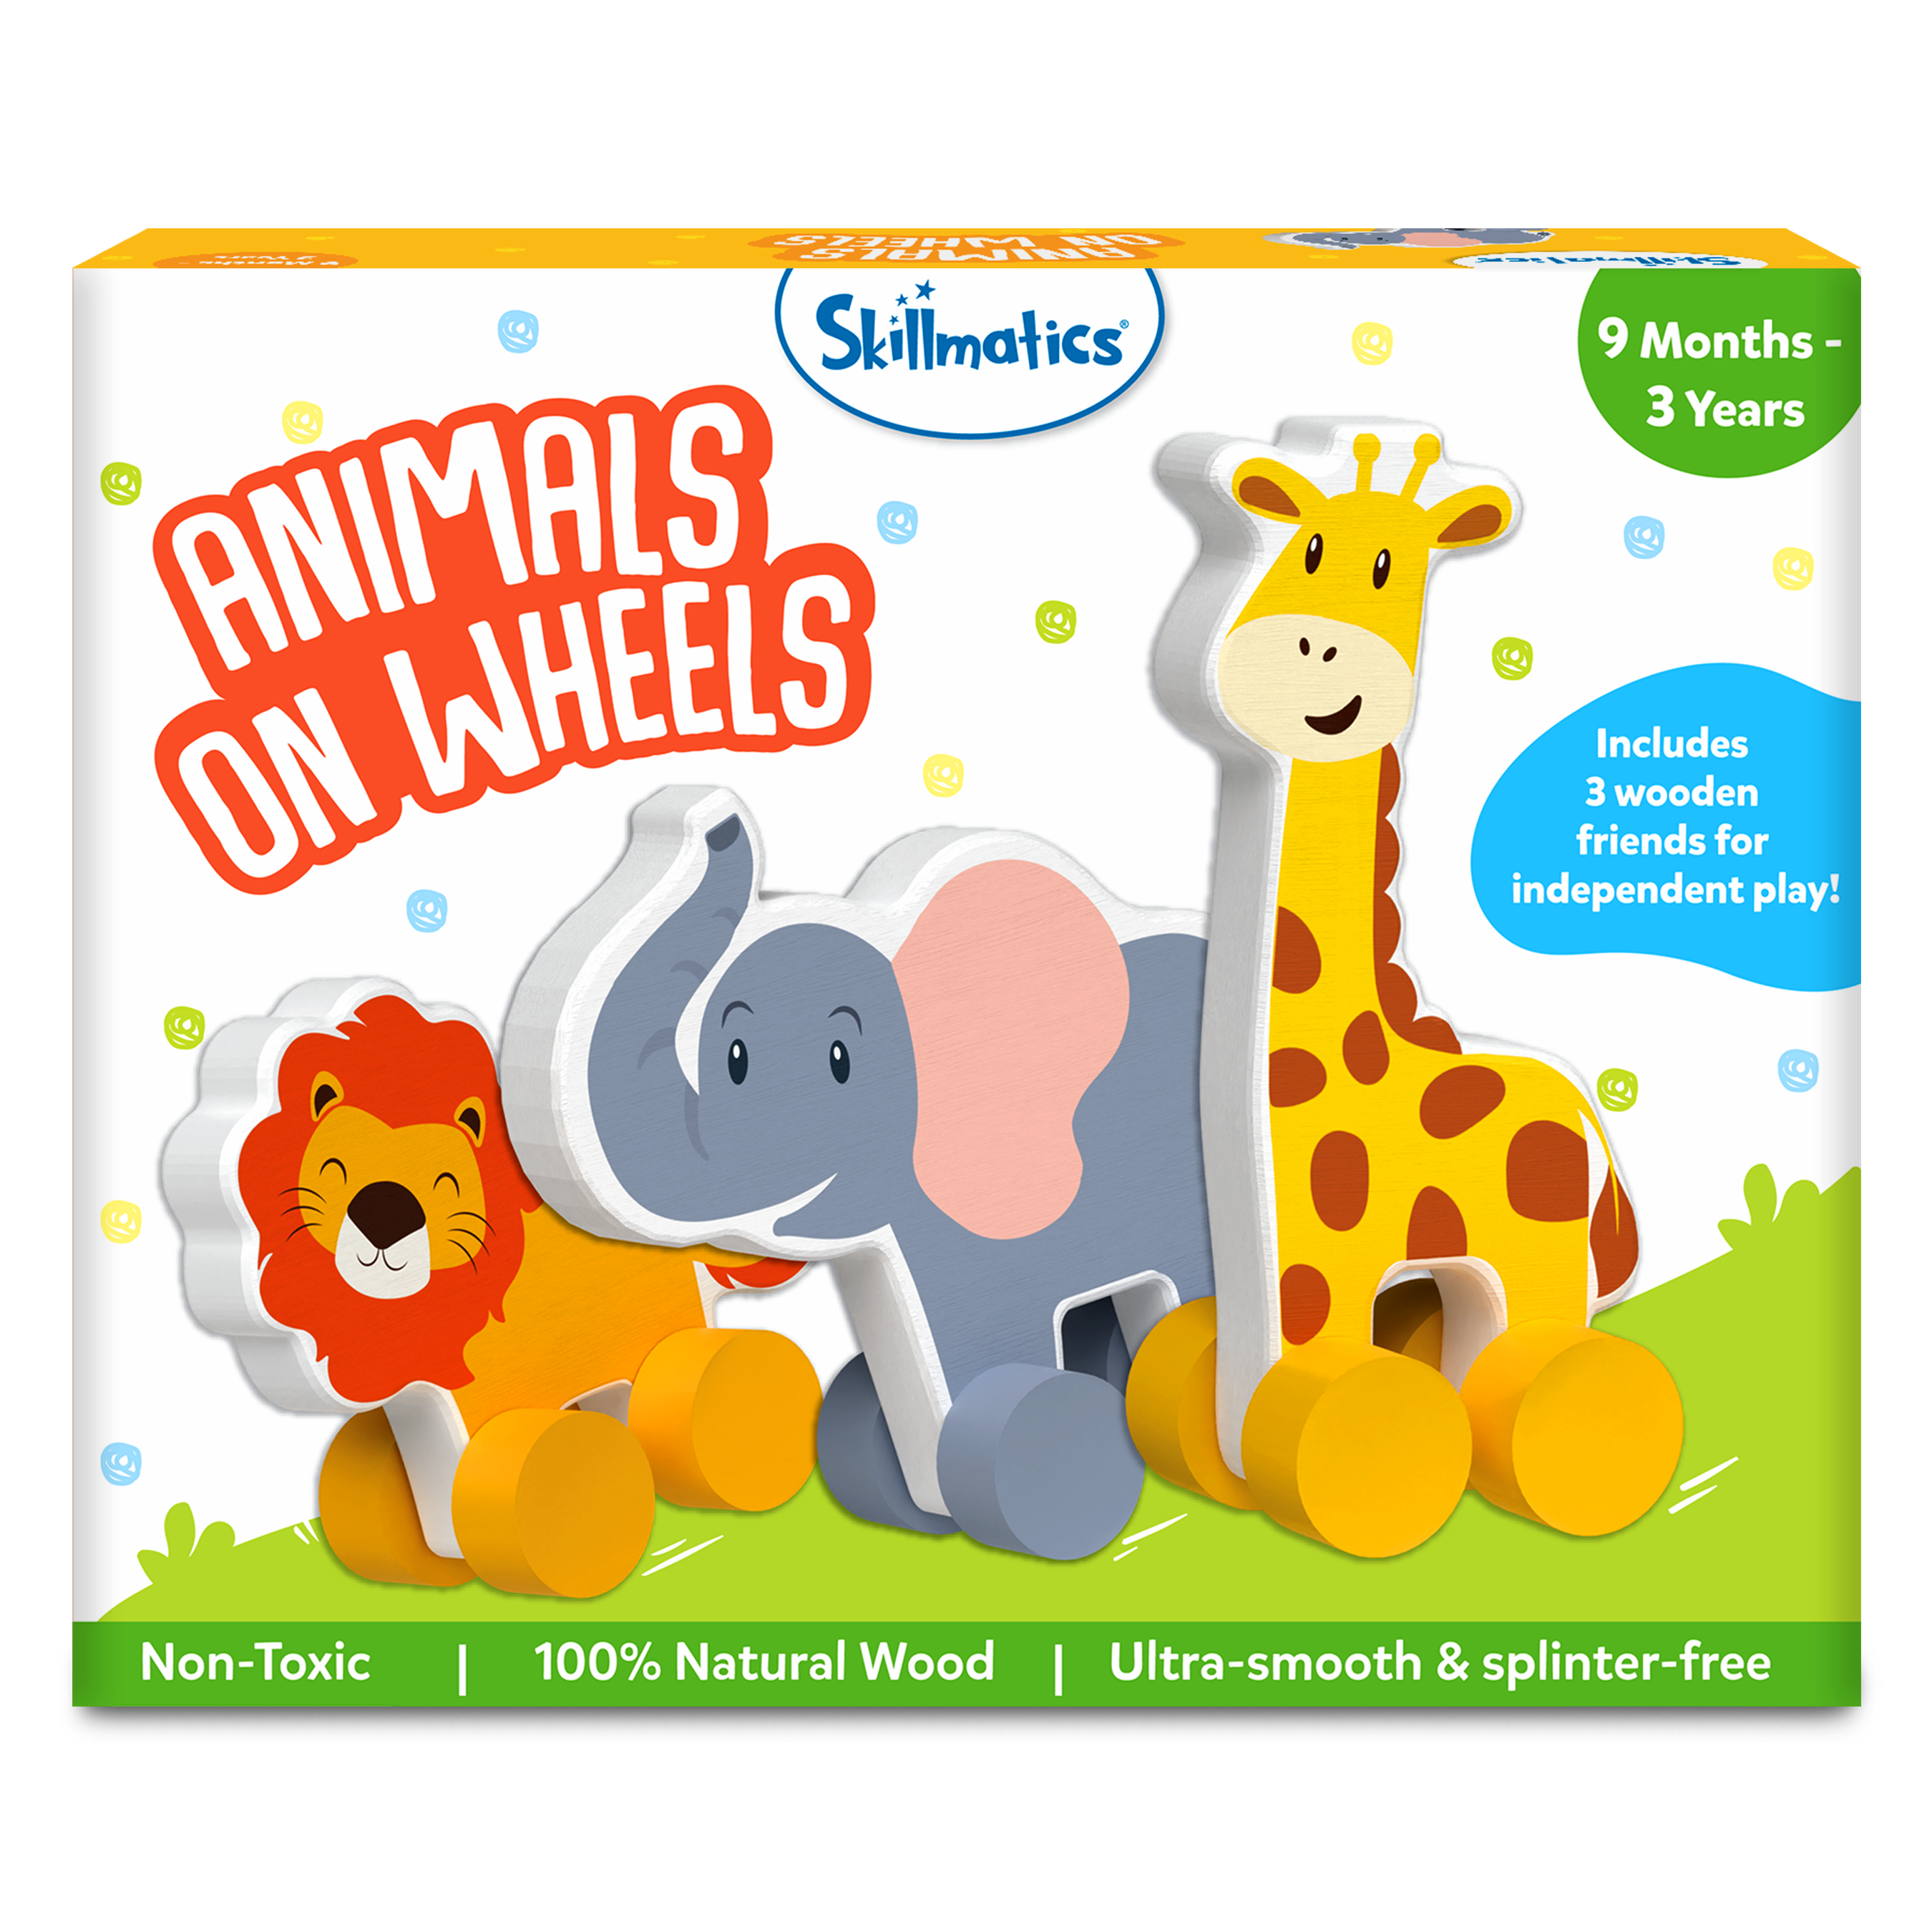 Skillmatics Wooden Animal Toys on Wheels, Imaginative Play for Toddlers, Educational Gifts for Infants 9 Months to 3 Years